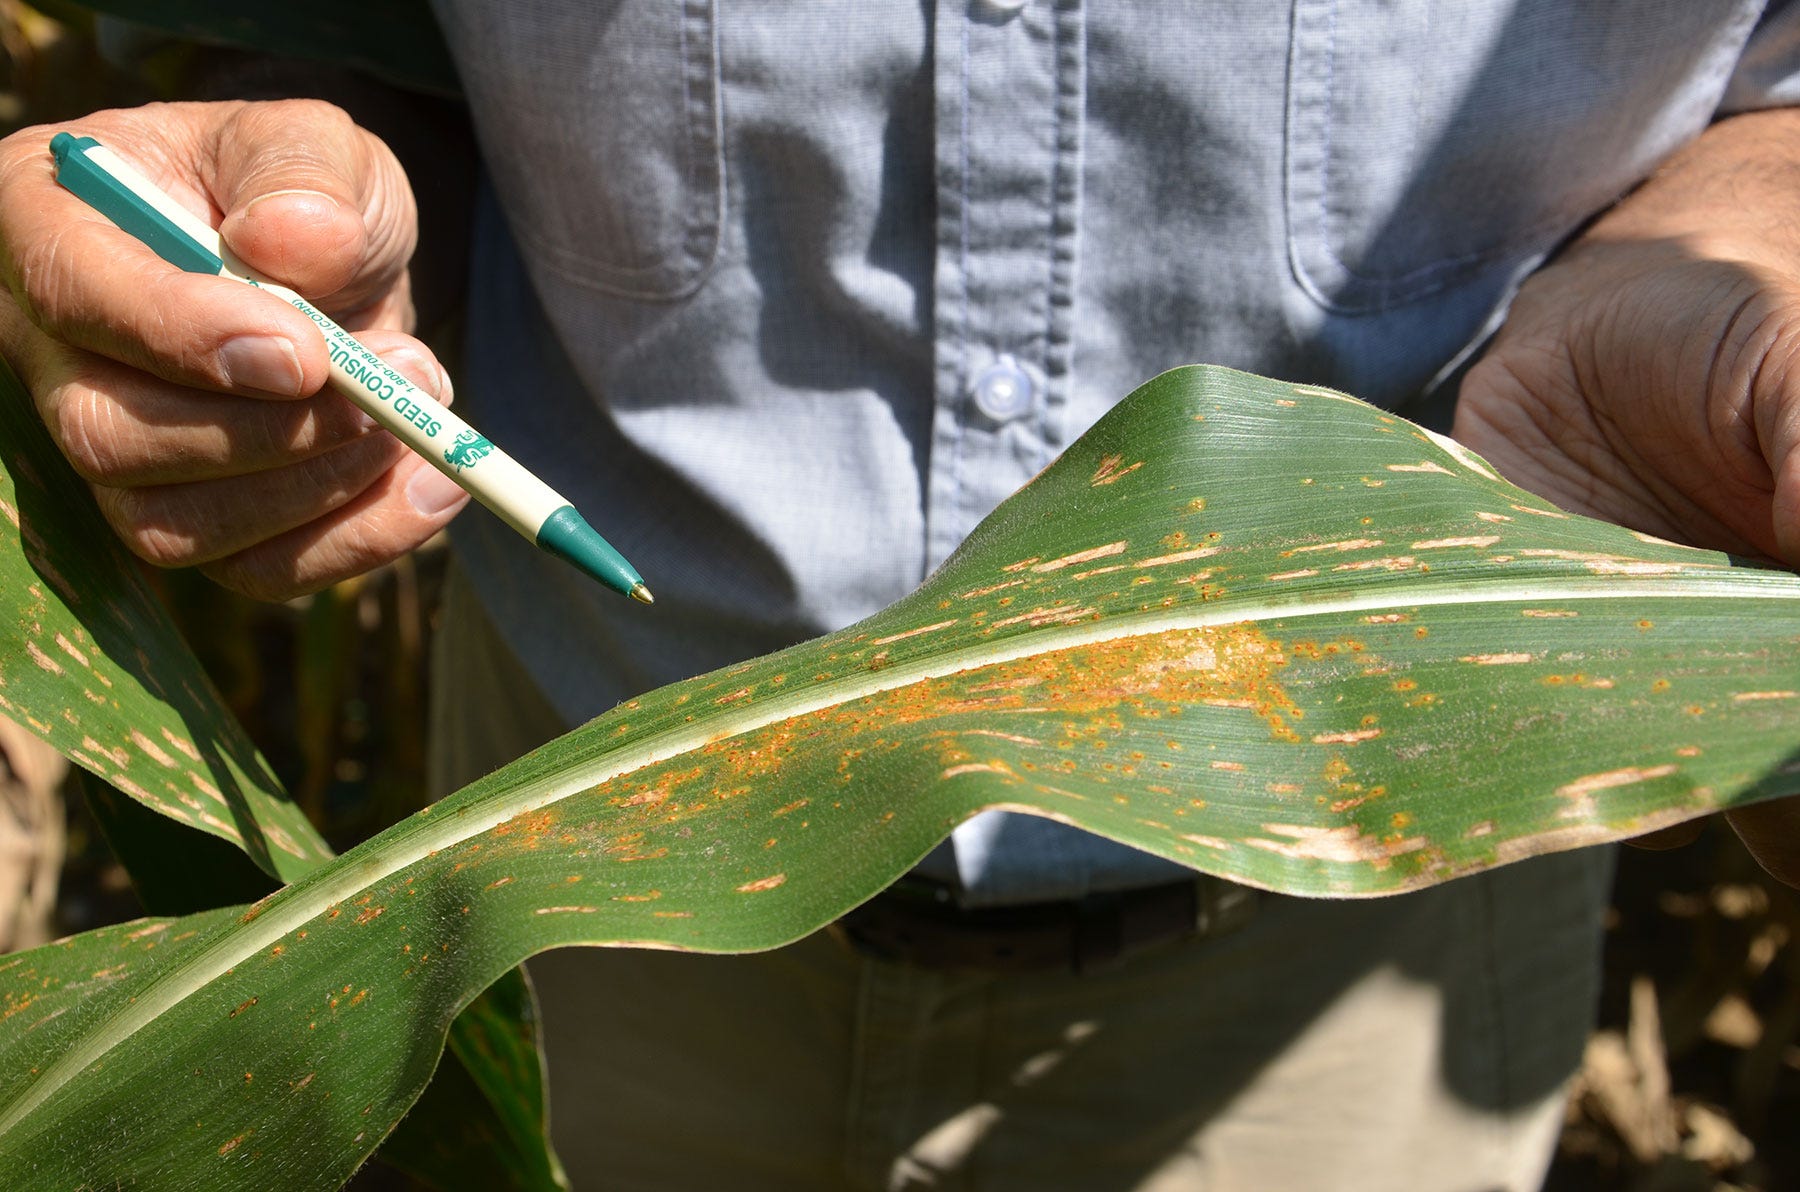 A man holding a pen and pointing to lesions on a corn leaf